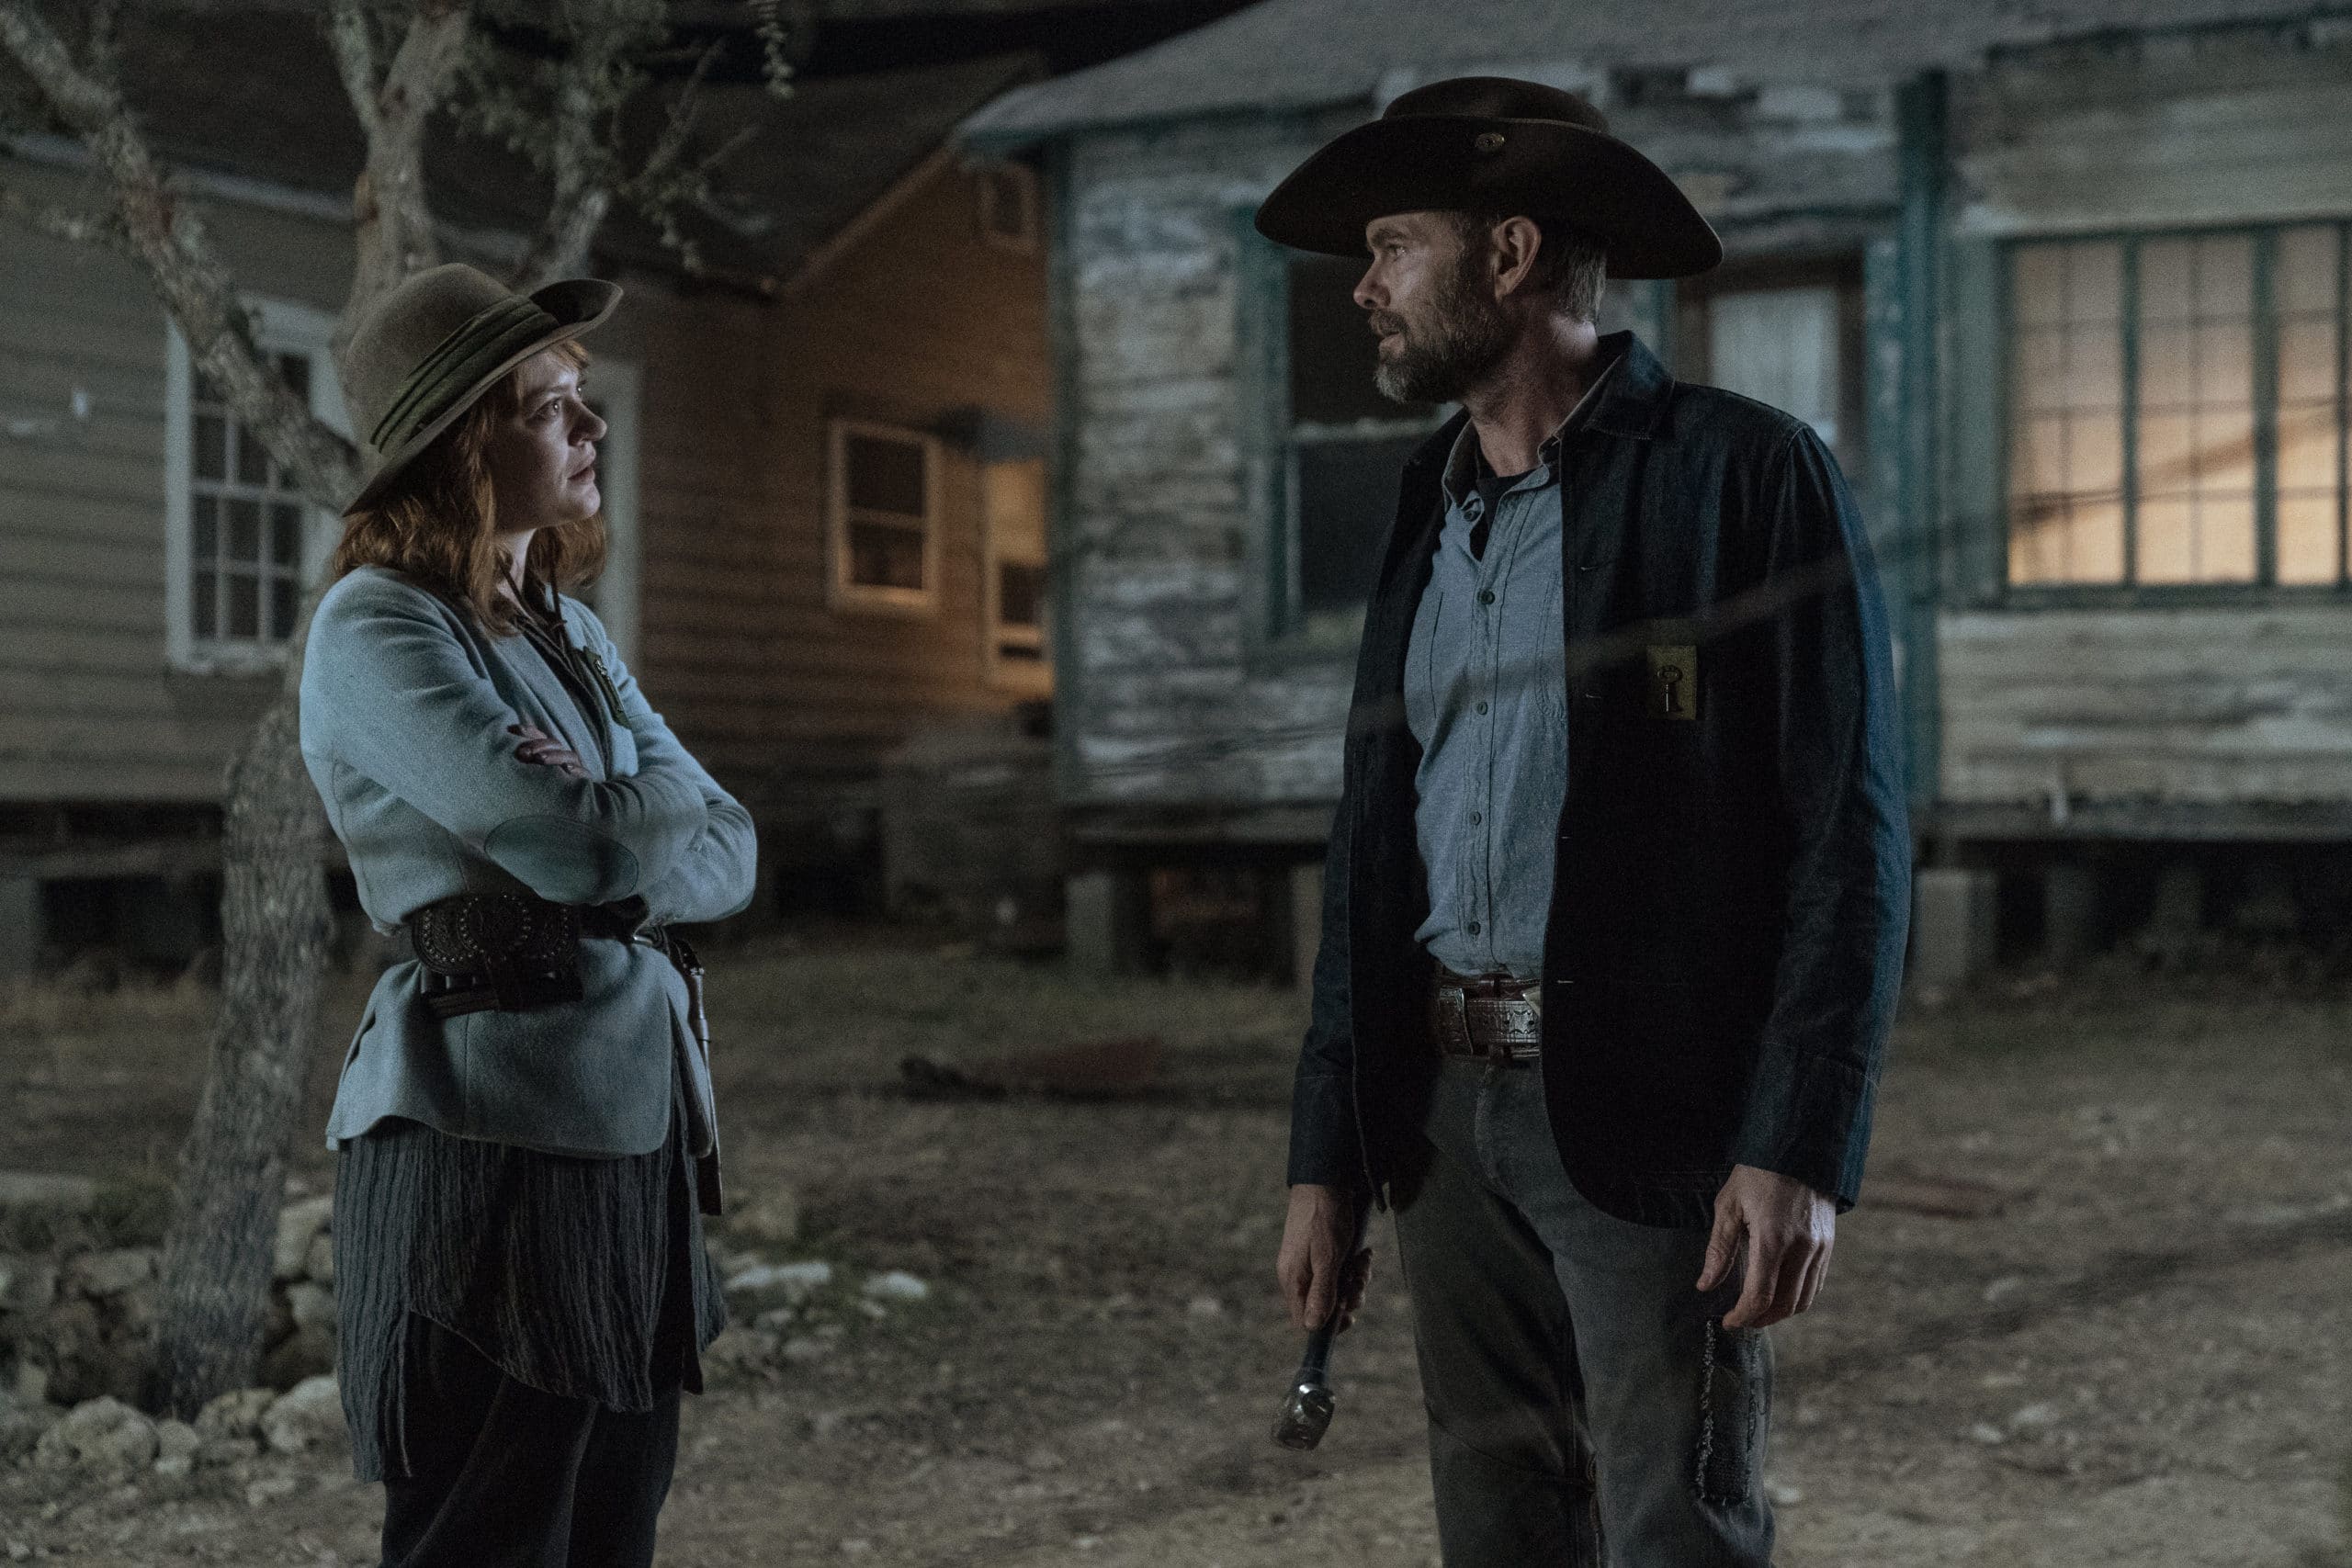 Colby Minifie as Virginia and Garret Dillahunt as John Dorie